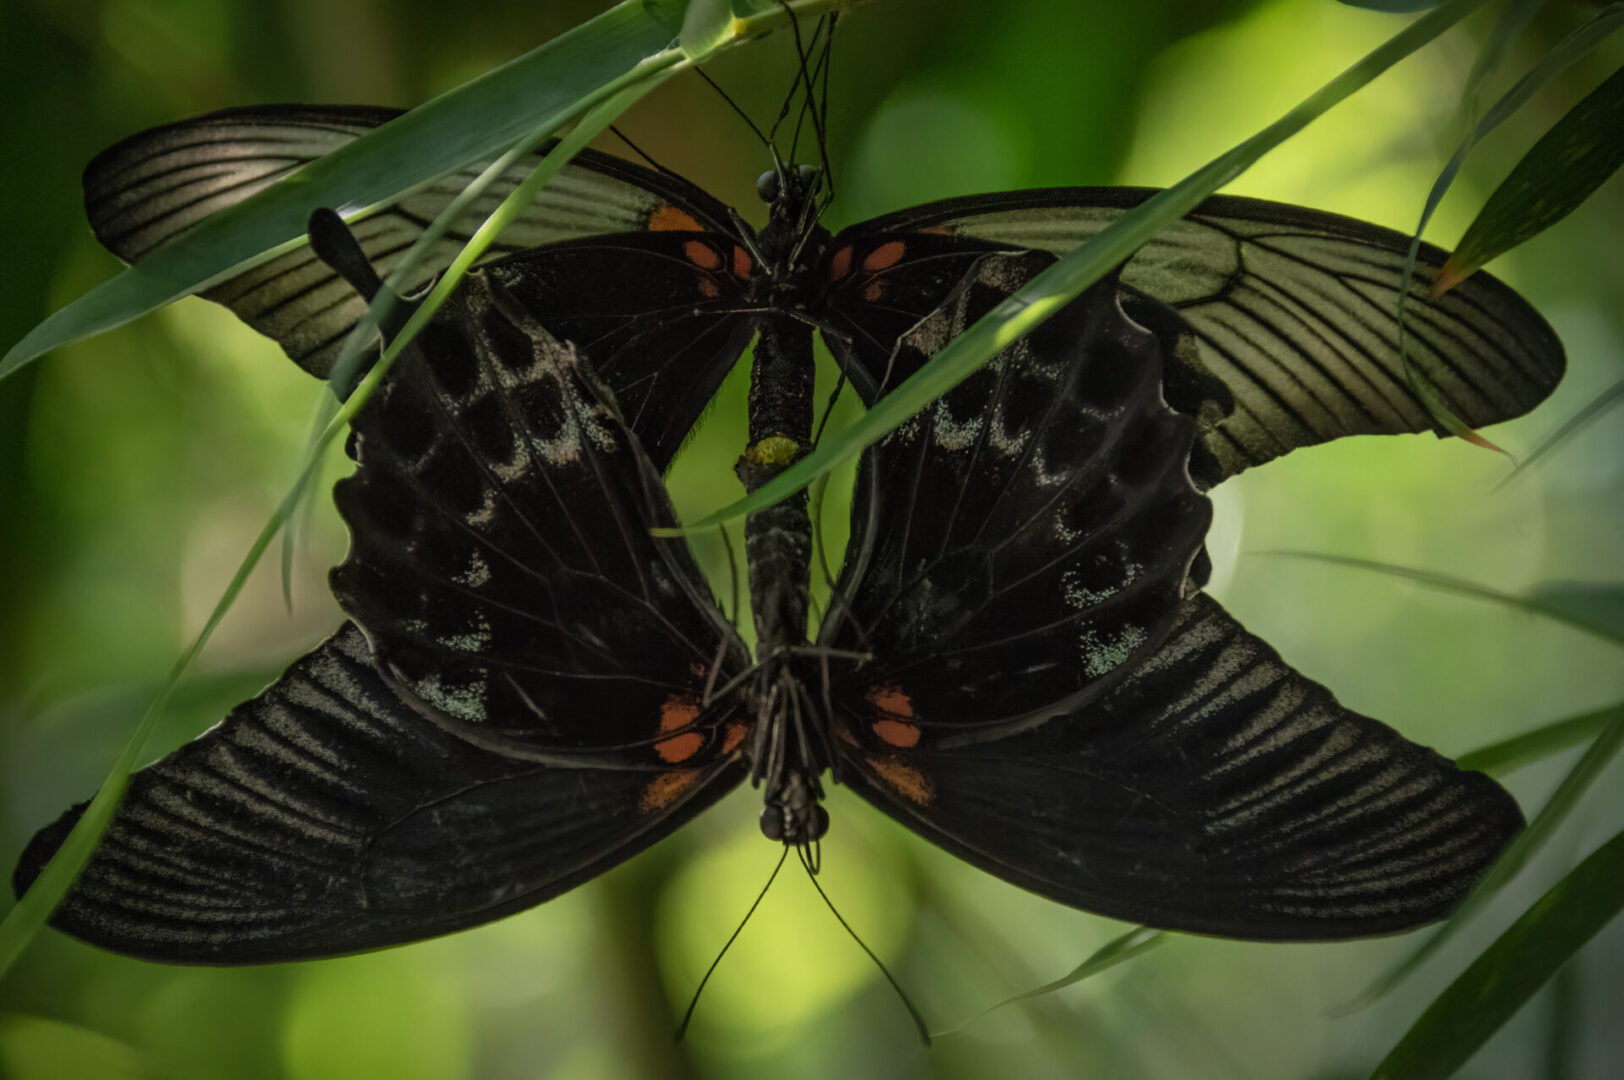 Two black and orange butterflies mating on a green leaf in a shadowed area, partially obscured by surrounding foliage.